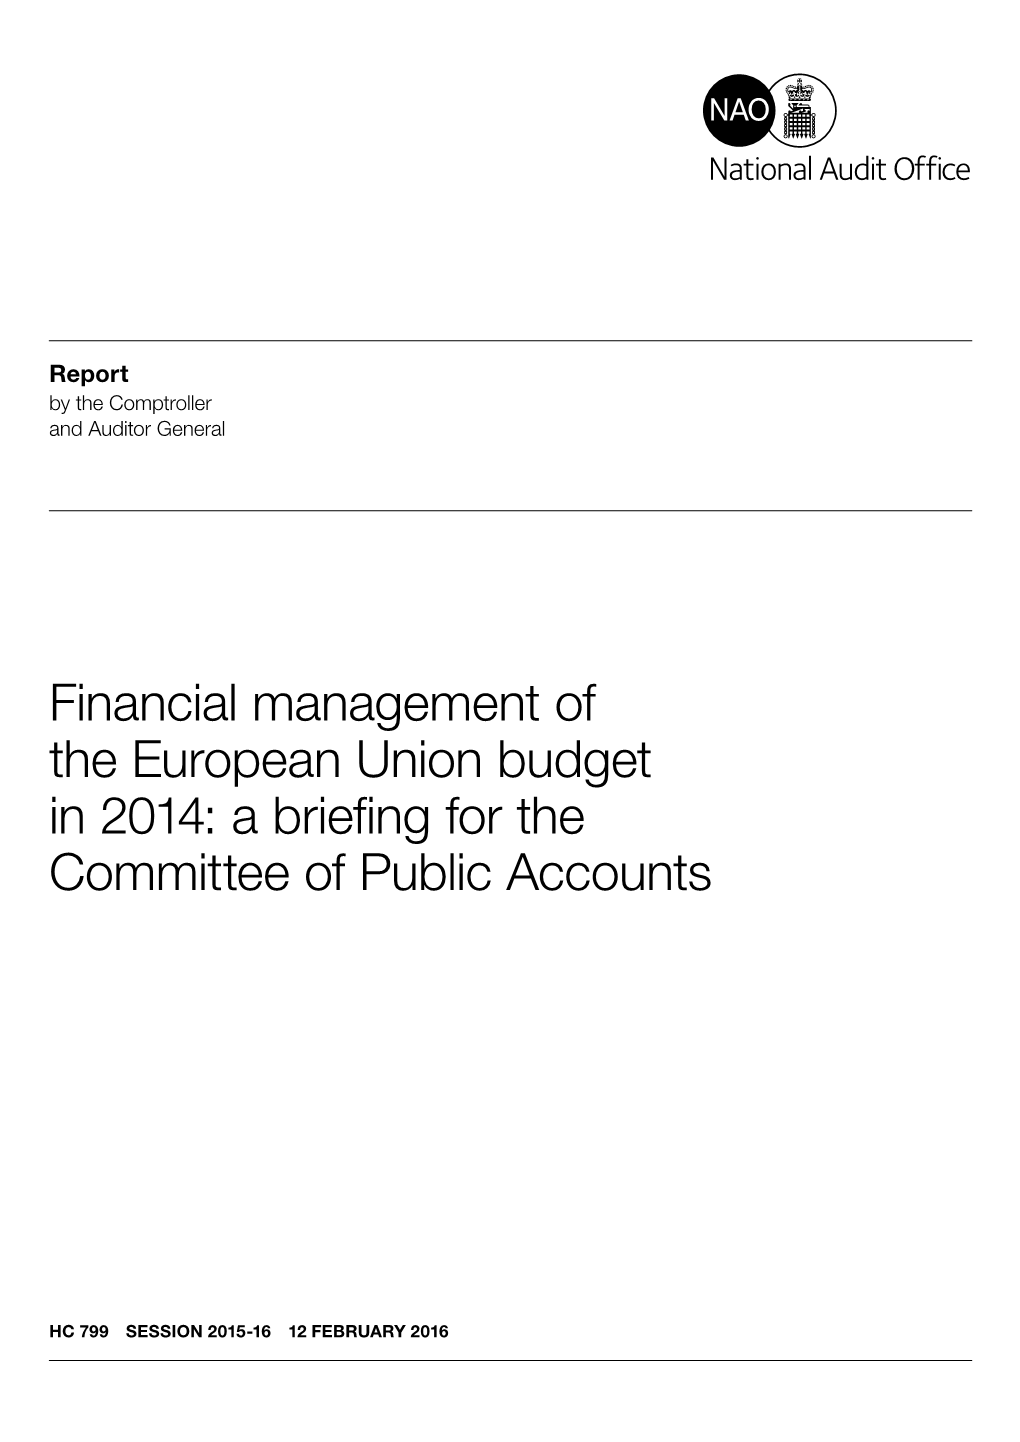 Financial Management of the European Union Budget in 2014 Appendix One 45